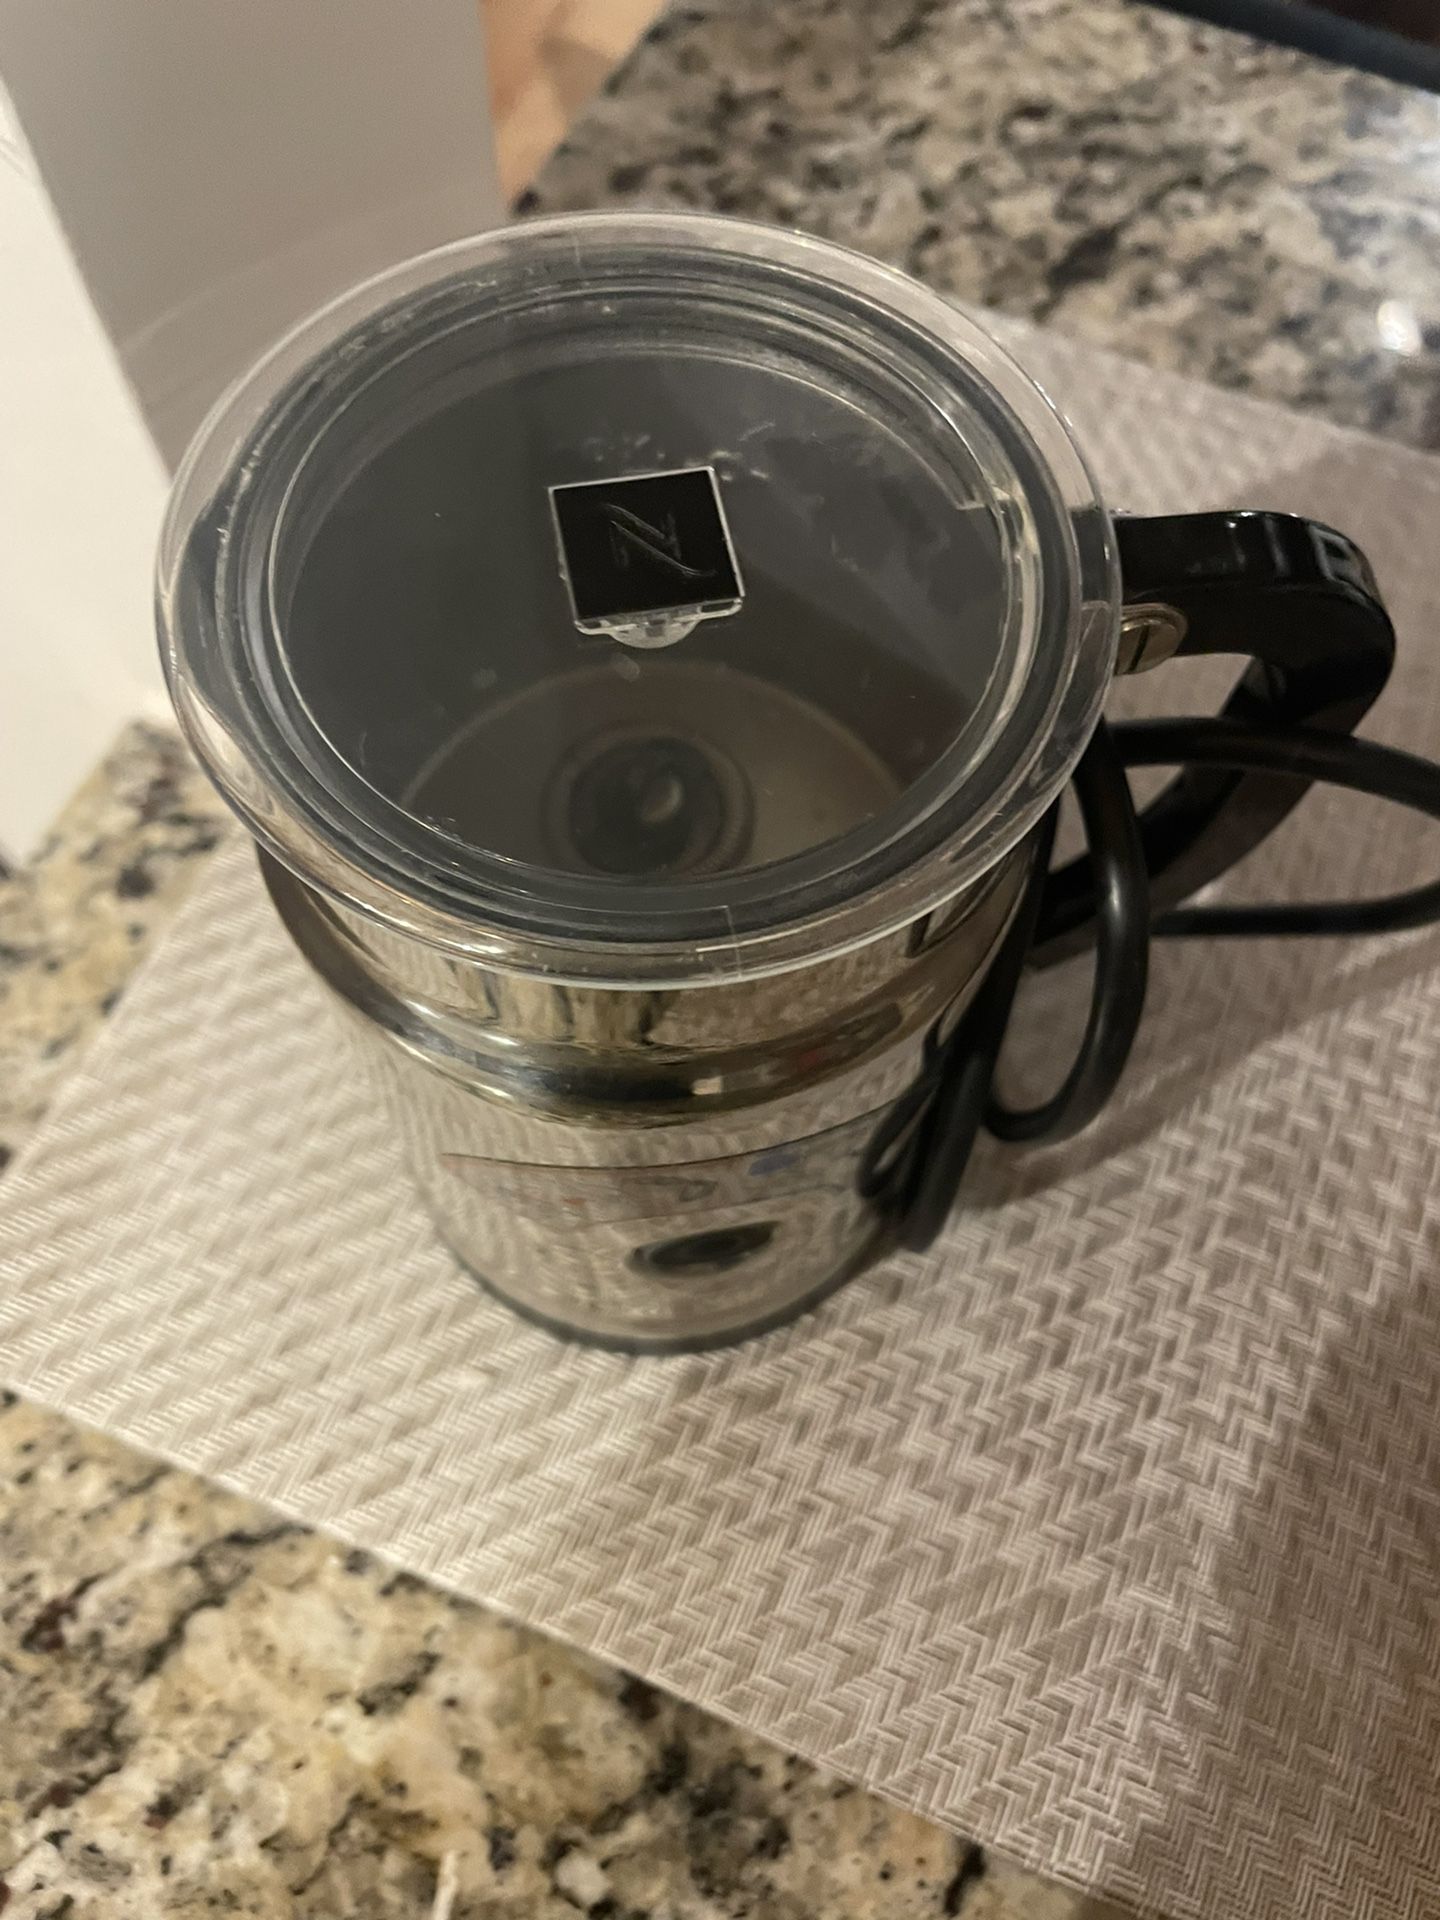 Bene Casa Espresso Coffee Maker With Milk Frother for Sale in Medley, FL -  OfferUp